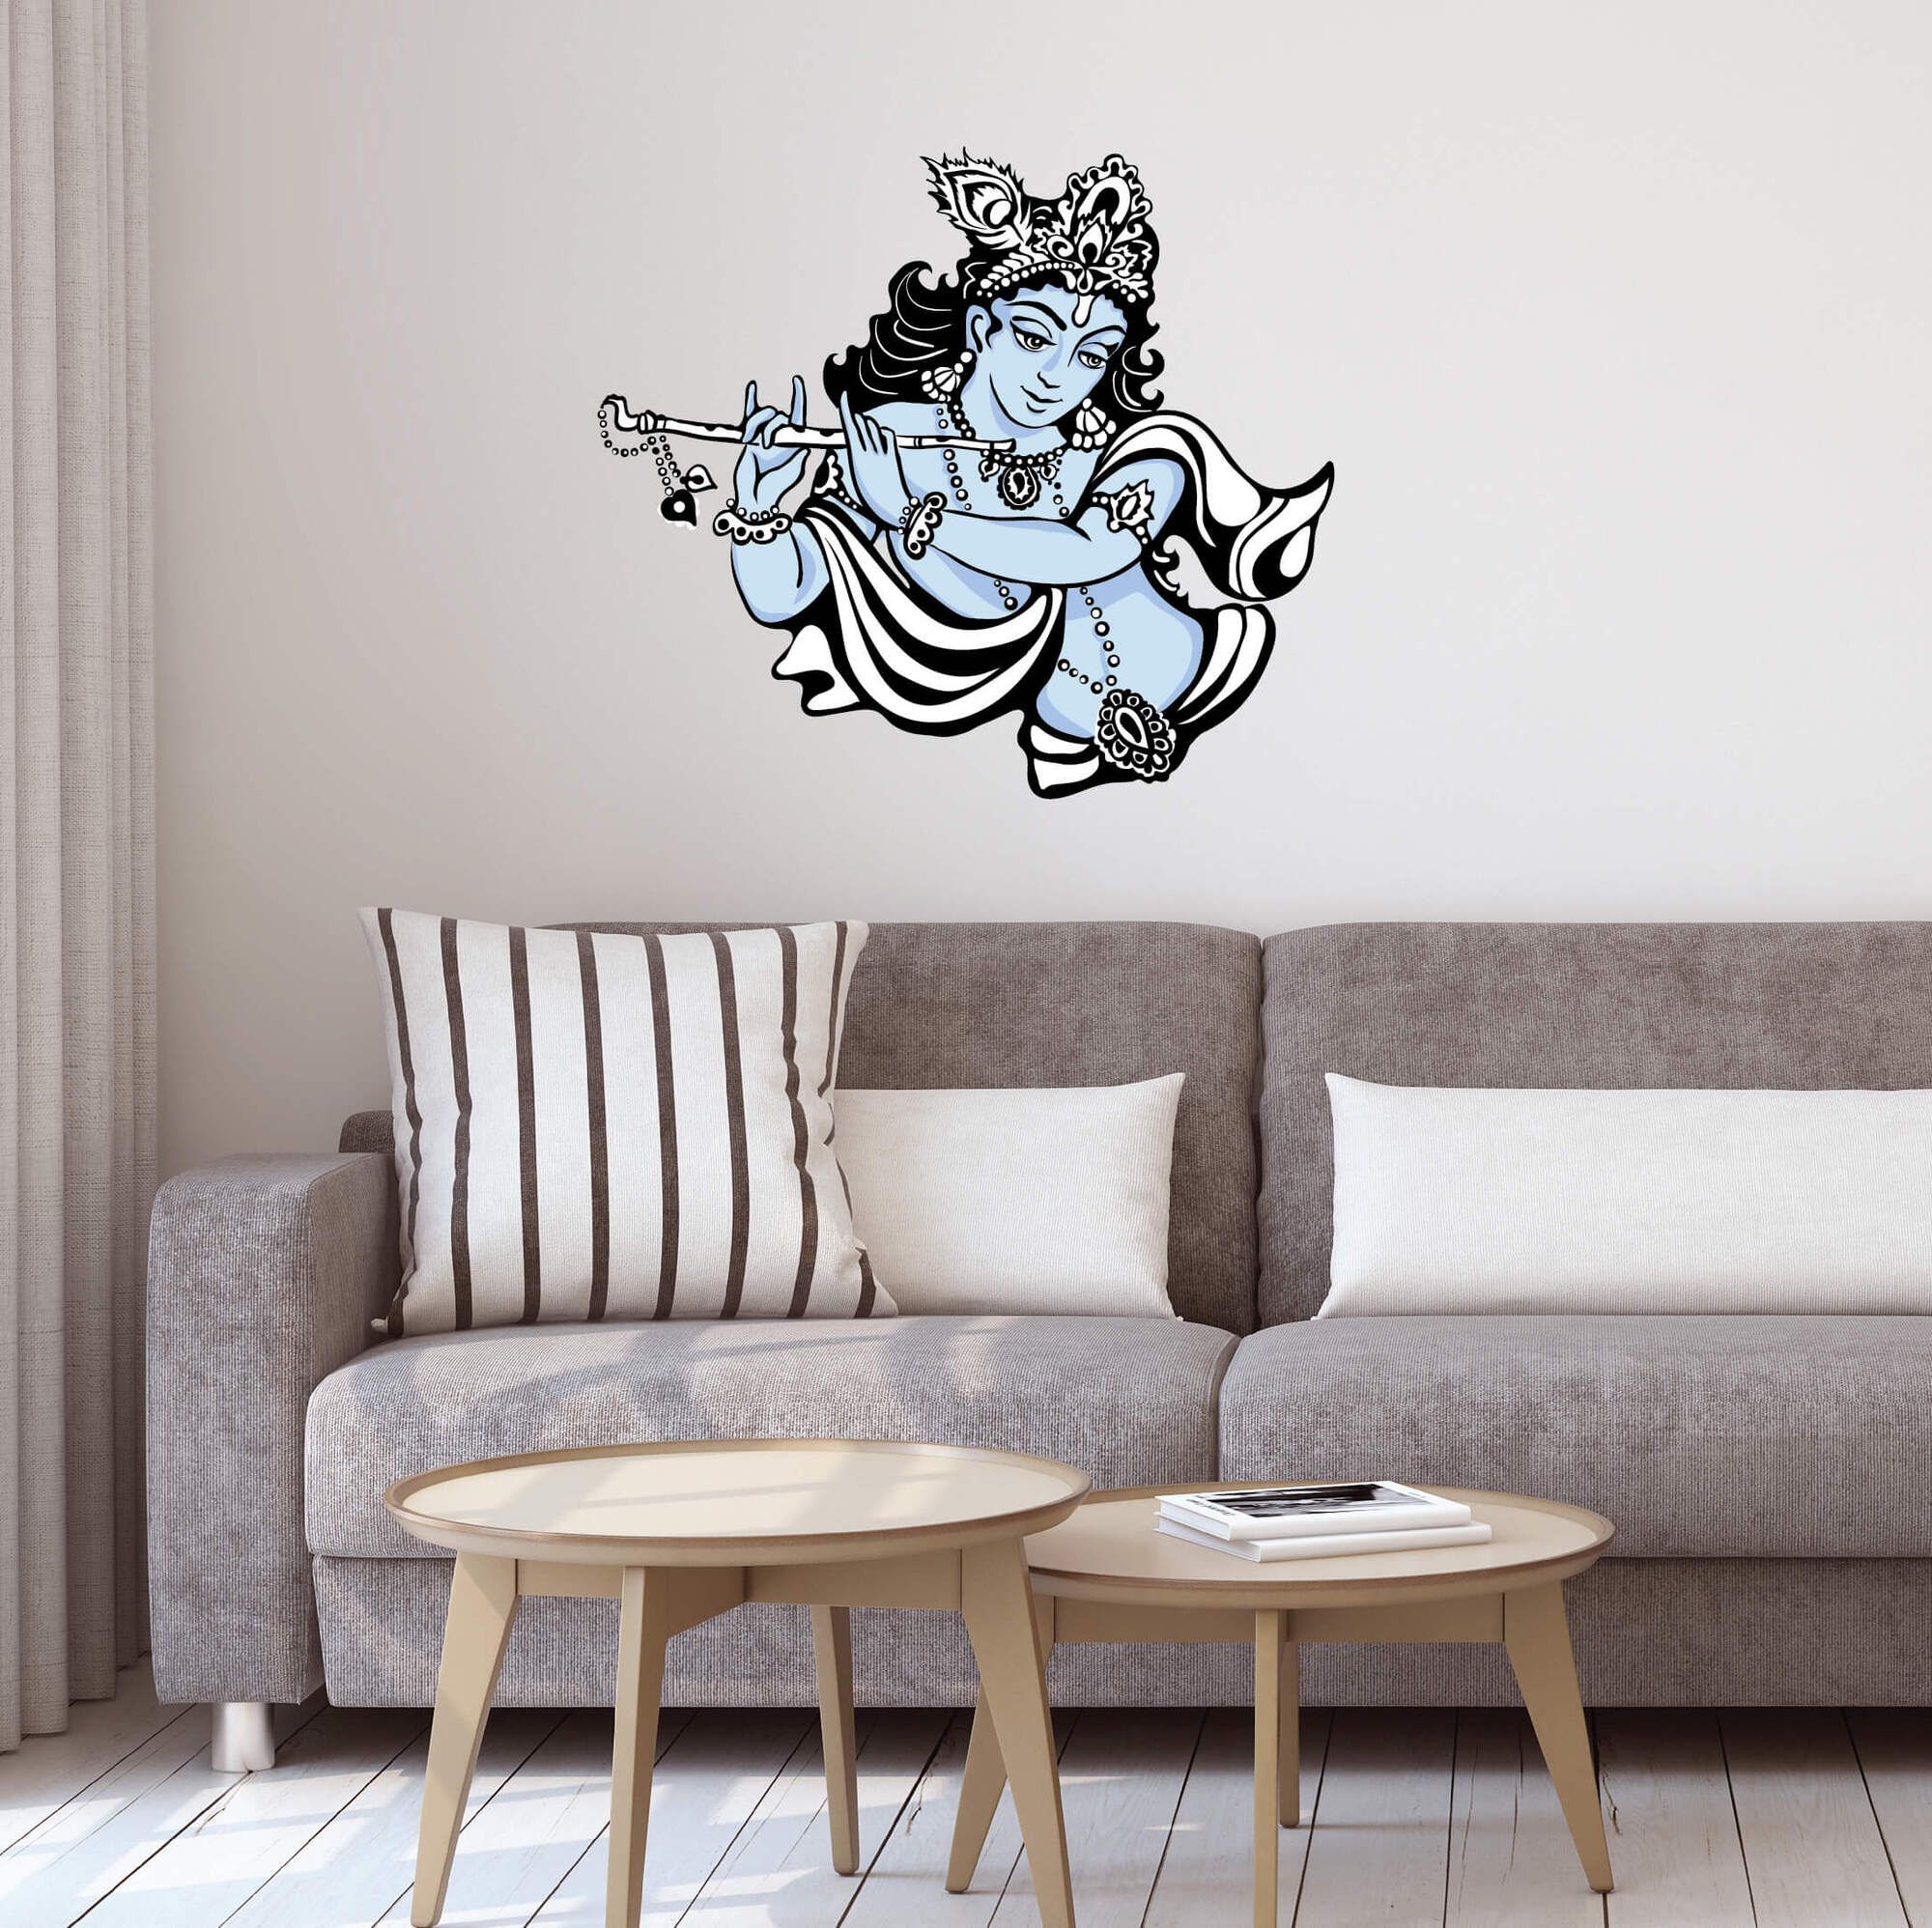 Lord Krishna Plays the Flute - Wall Stickers & Decals by Asian Paints